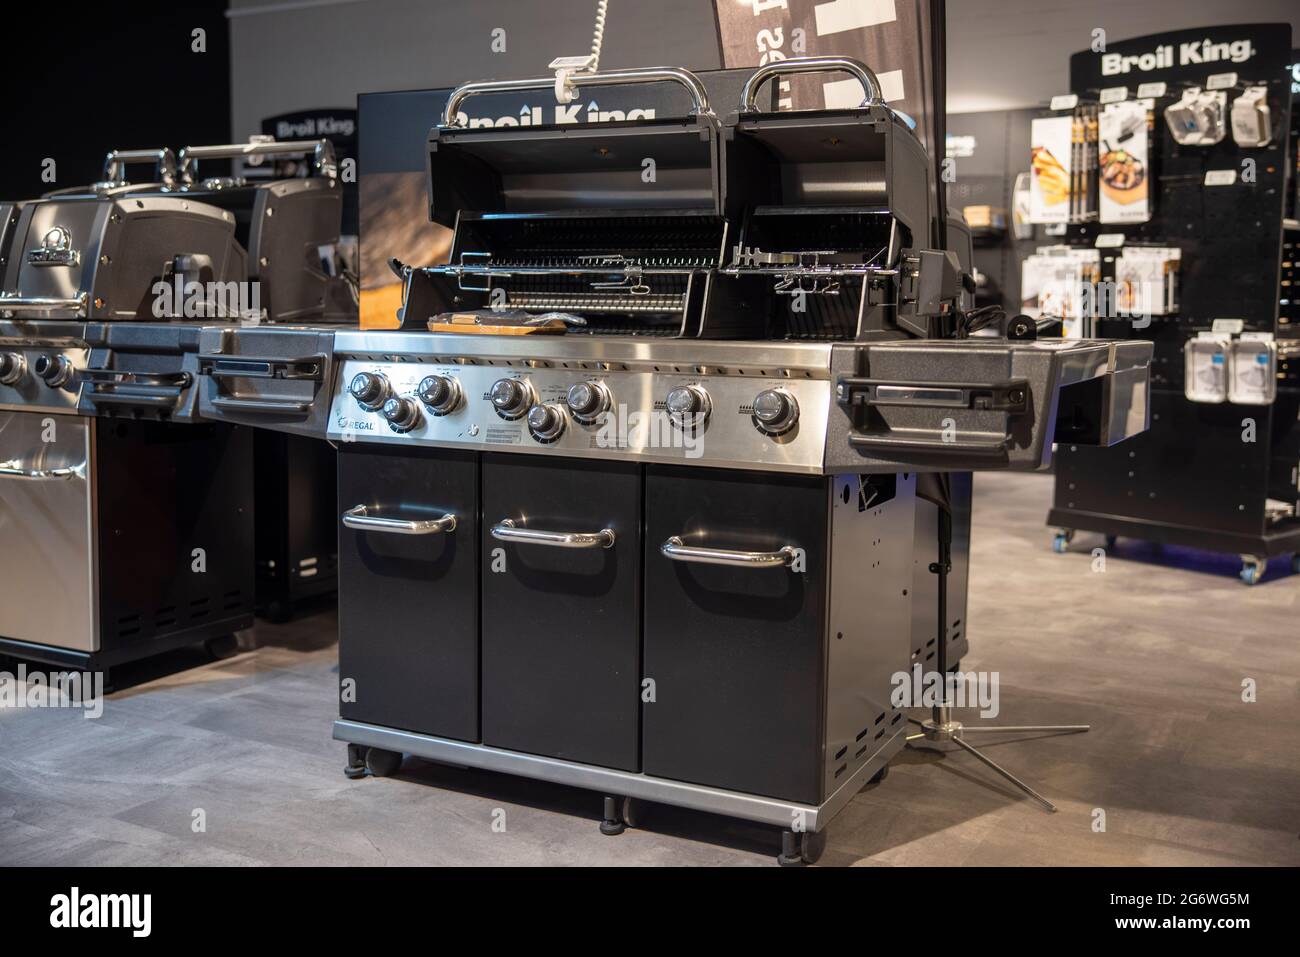 Bad Hersfeld, Germany. 30th June, 2021. A Broil King Regal XL gas grill  stands in the headquarters of Grillfürst GmbH. (to dpa "With steaks and  corn on the cob: barbecue industry booms